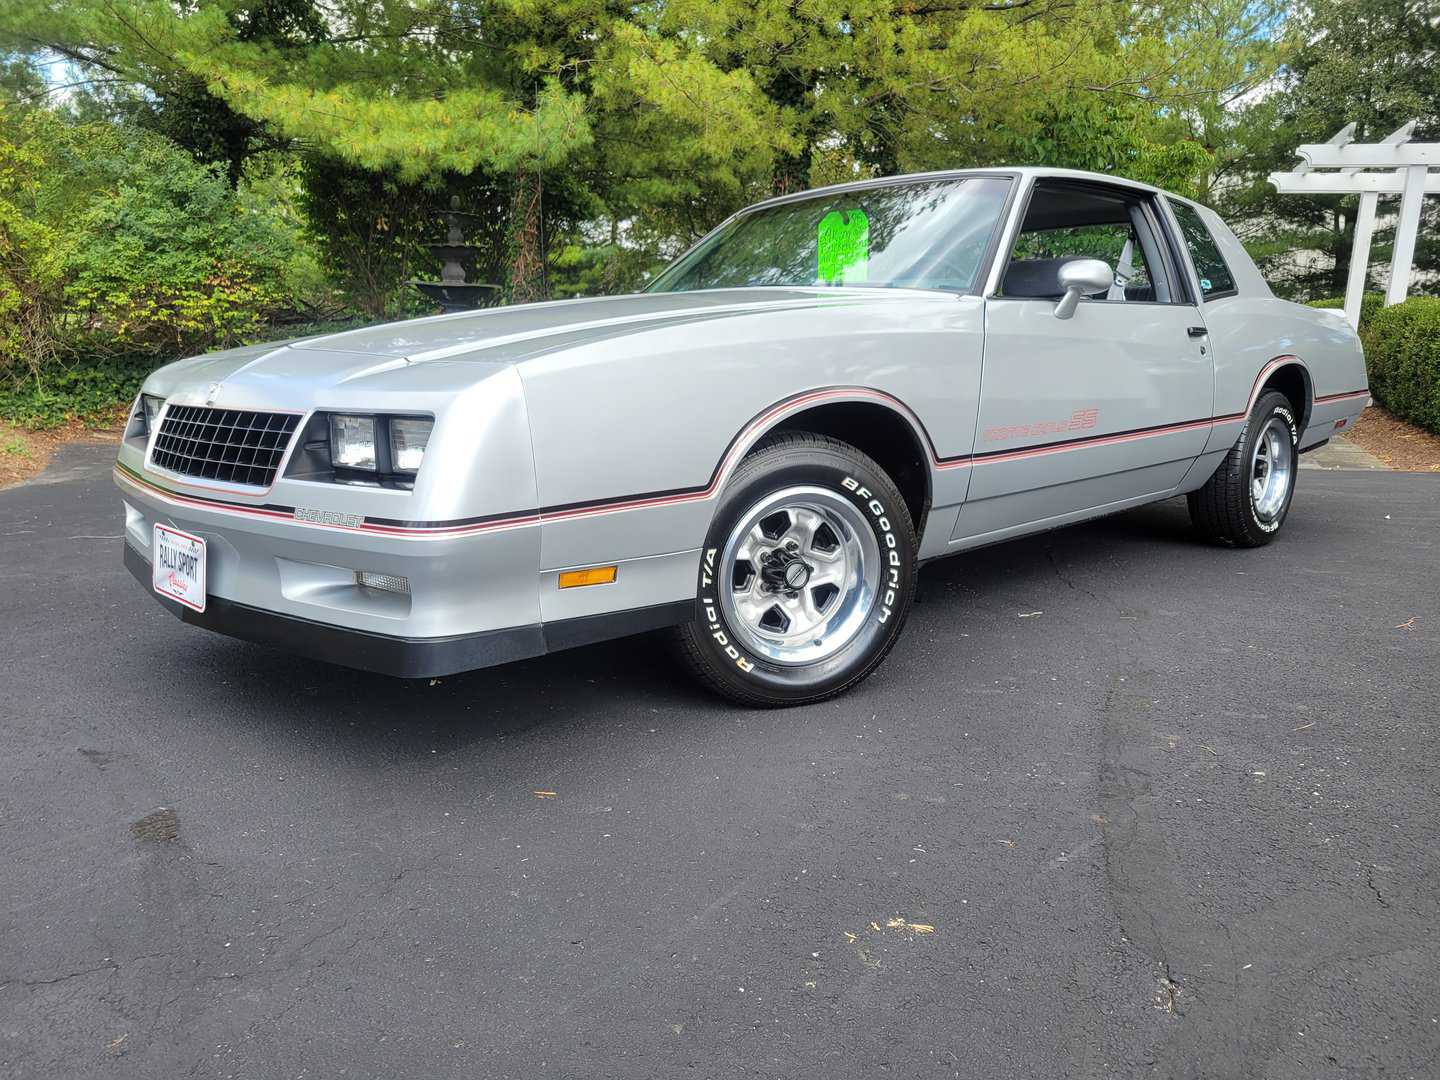 A silver Chevrolet Camaro parked in a parking lot adjacent to a 1985 Monte Carlo SS.